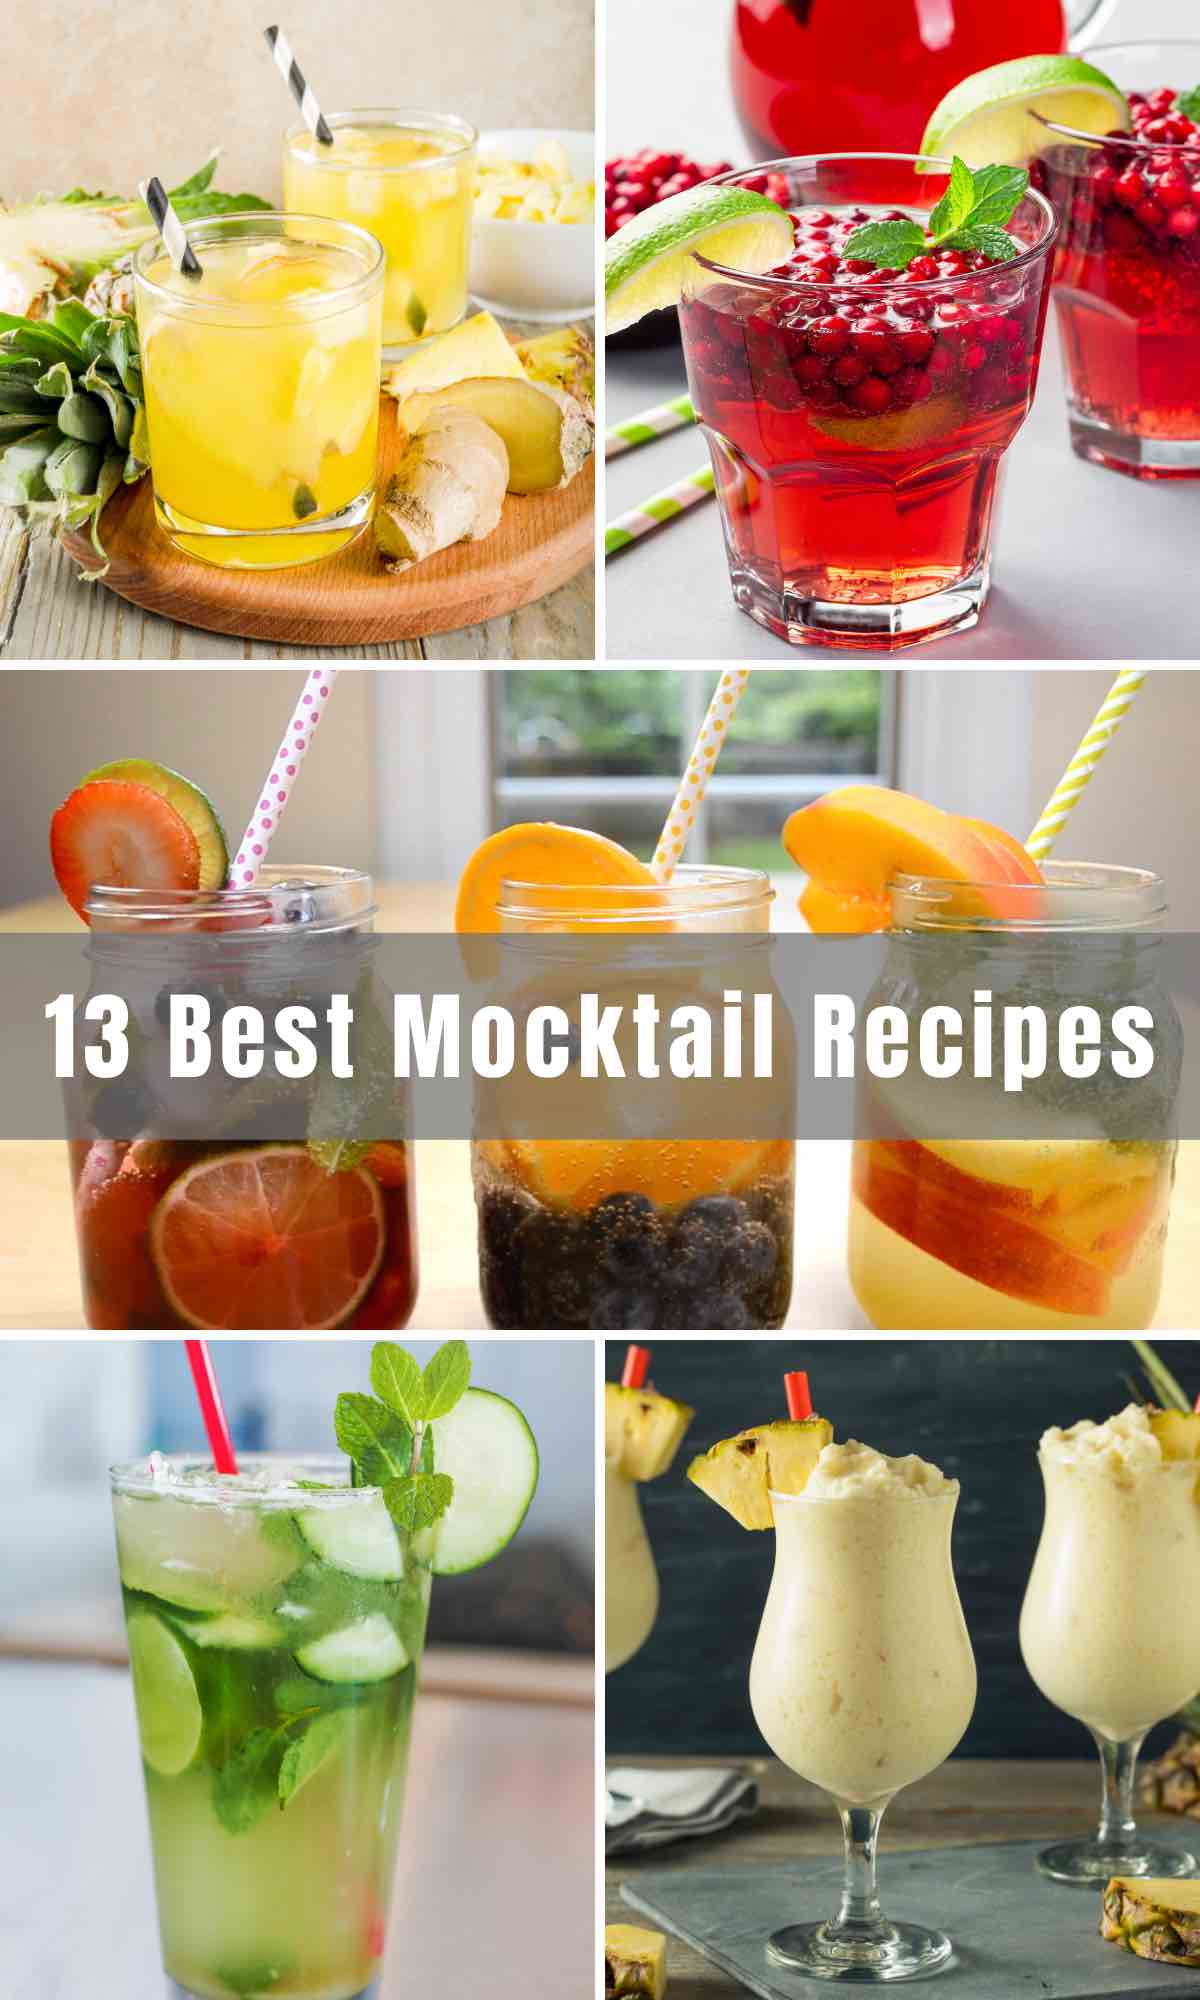 Who says you need cocktails and alcohol to have a good time? We’ve collected 13 Best Mocktail Recipes that are refreshing, tasty, and contain 0% booze. They’re perfect for your Dry January challenge, baby showers, and church events.